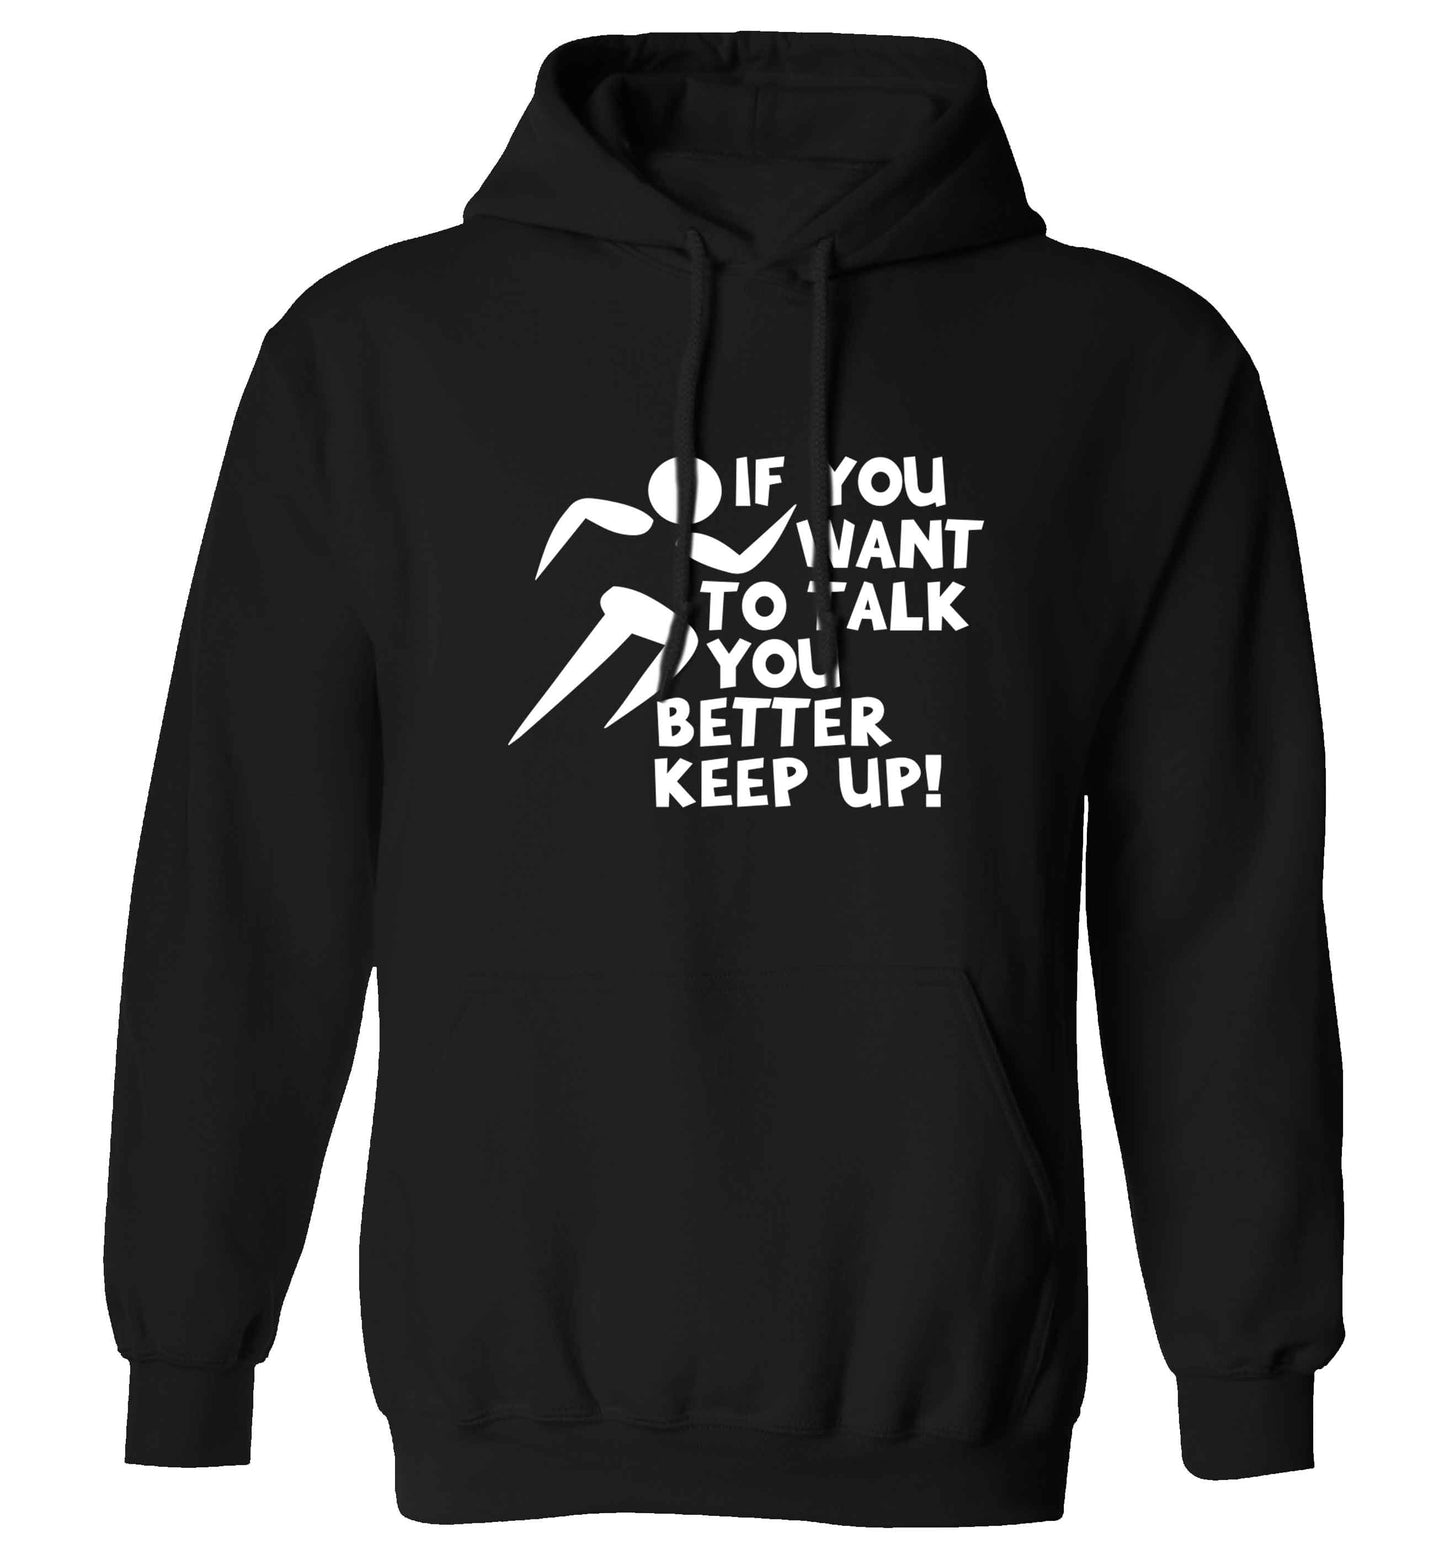 If you want to talk you better keep up! adults unisex black hoodie 2XL